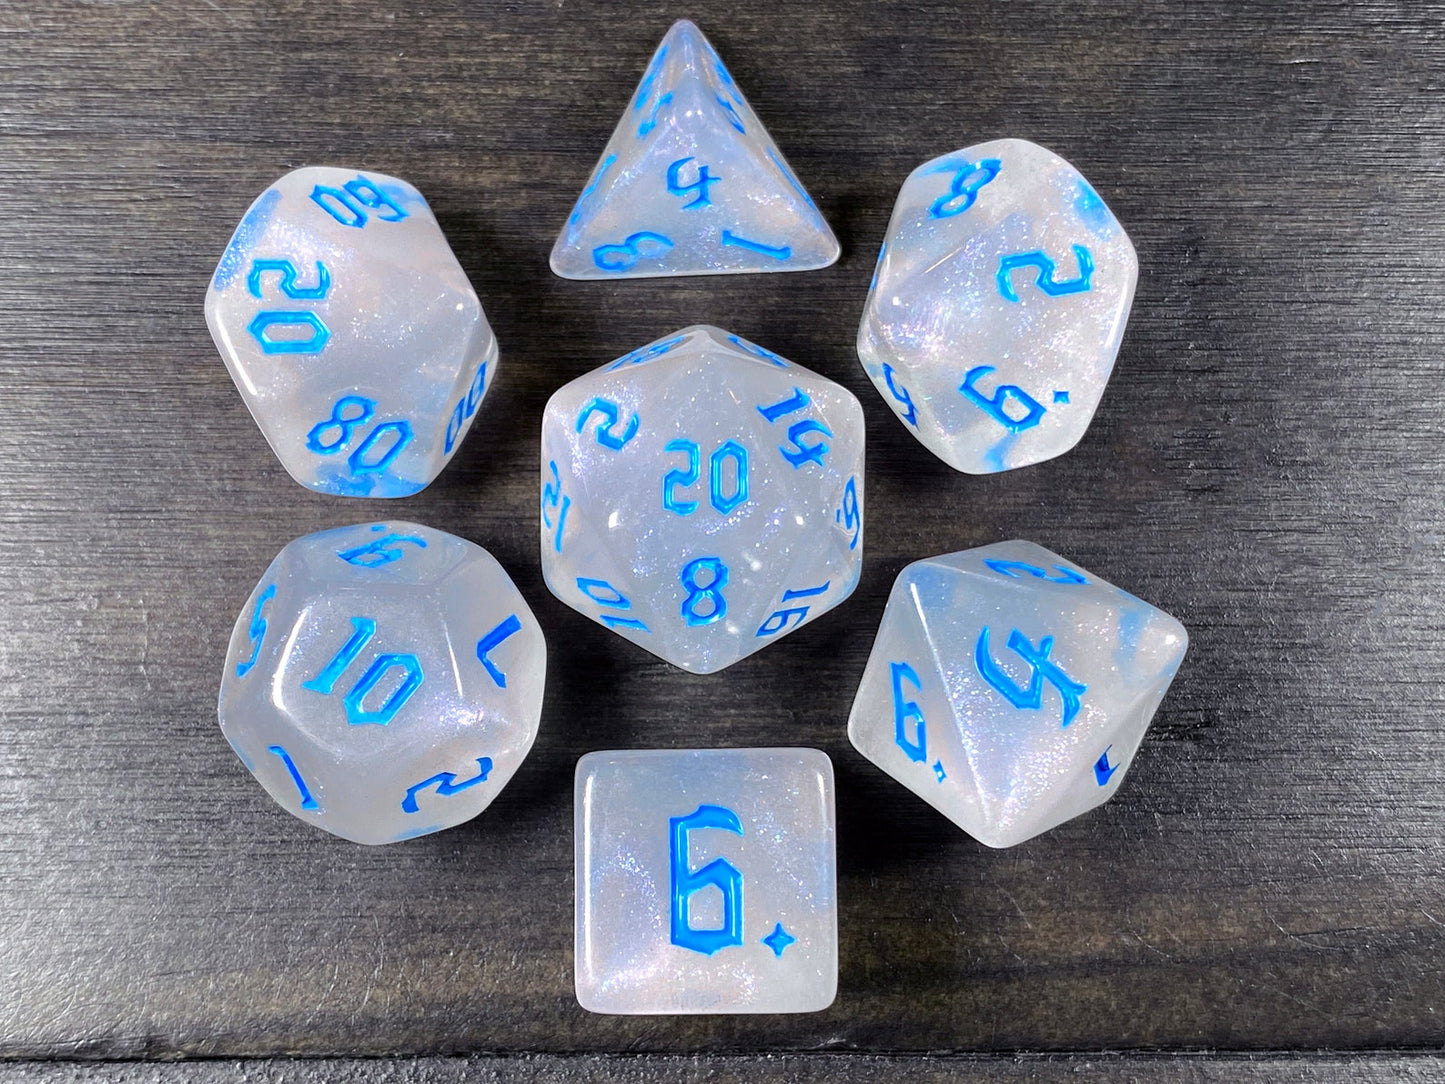 FREE Today: Icewind DnD Dice Set